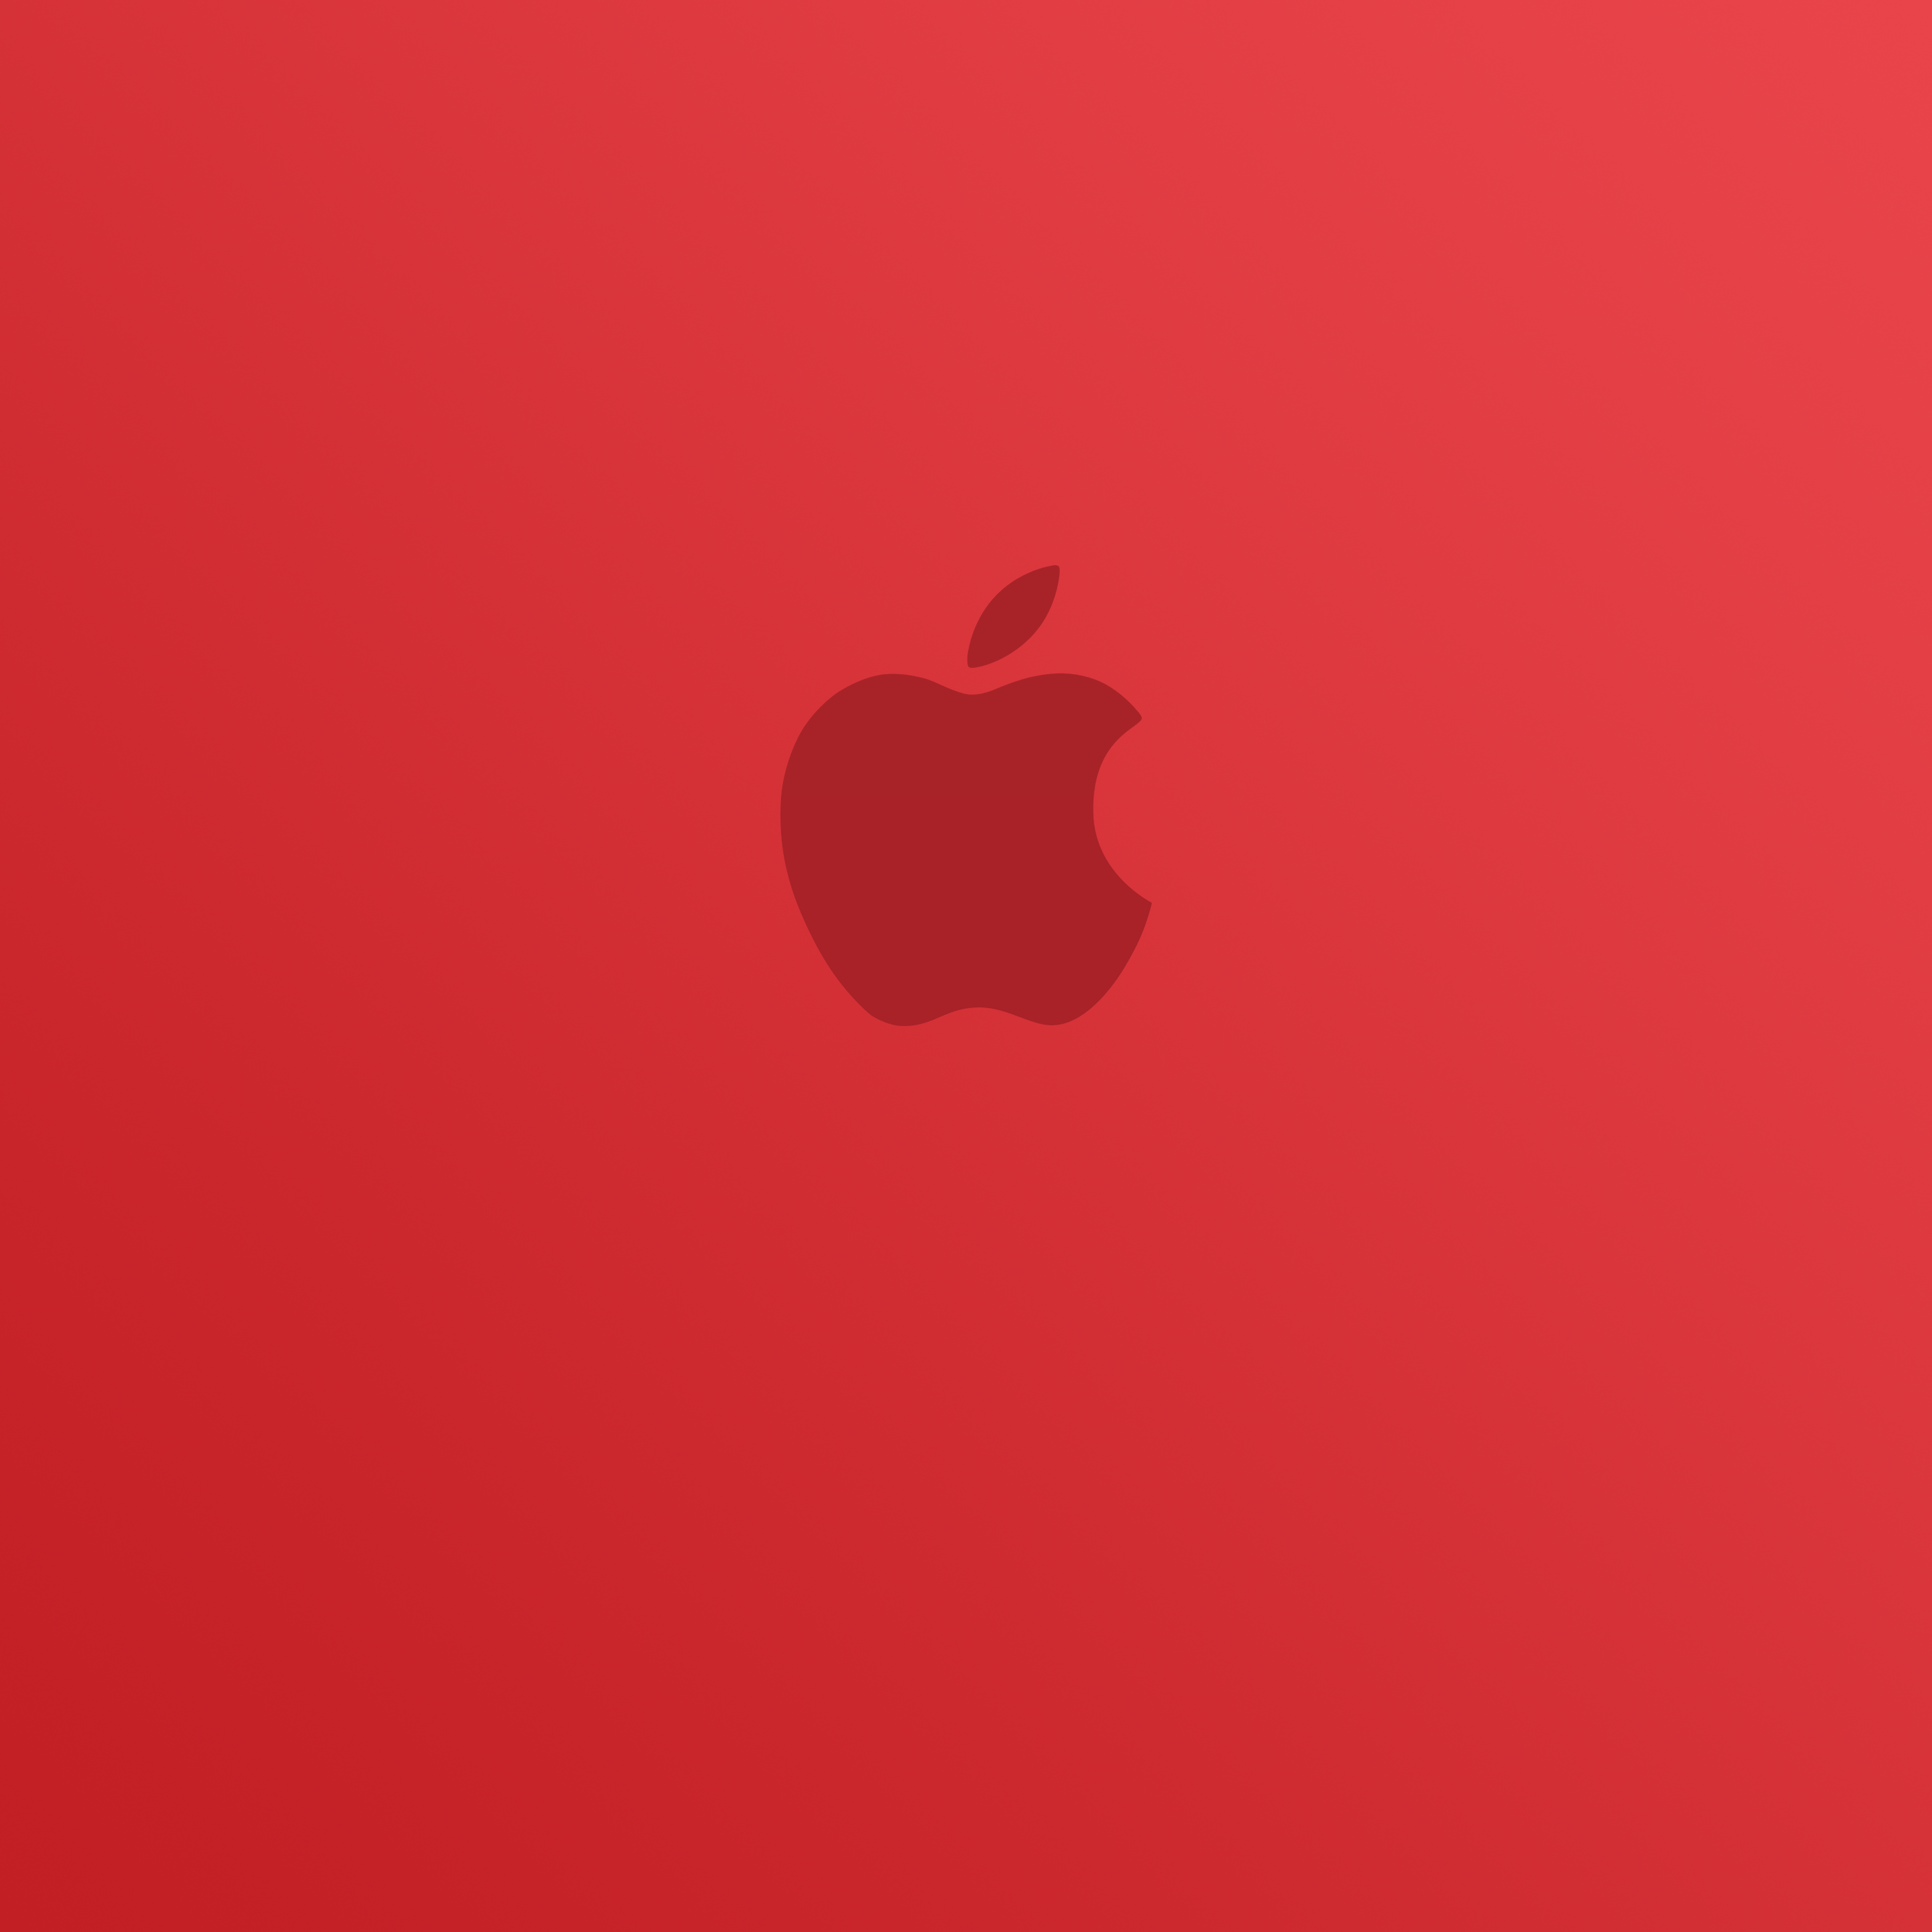 iWallpapers - Red inspired Apple logo backgrounds | iPad pro ...